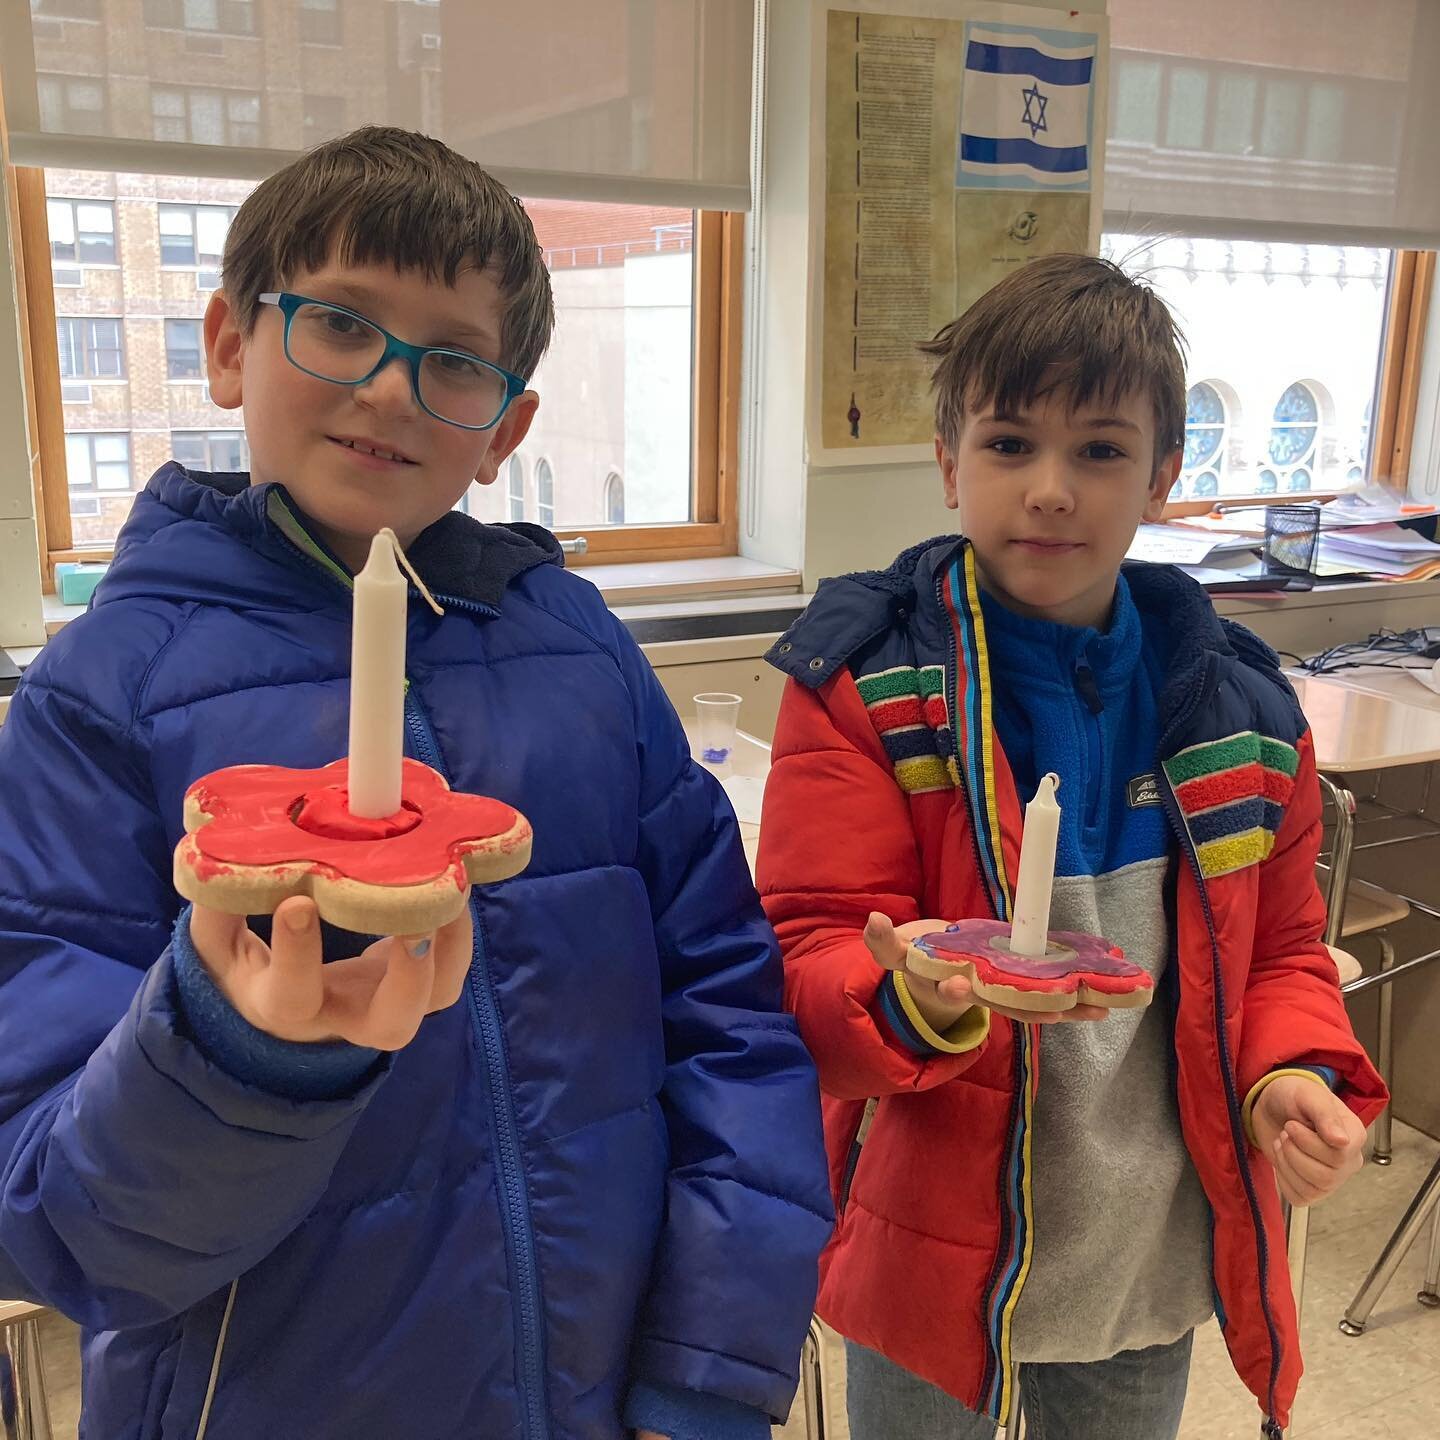 This past Sunday our students learned about the Mitzvah of Shabbat taught in this week&rsquo;s Parsha, and got to make Shabbat candles of their own!

We wish everyone a restful Shabbat, and we are so excited to start our Passover prep with our studen